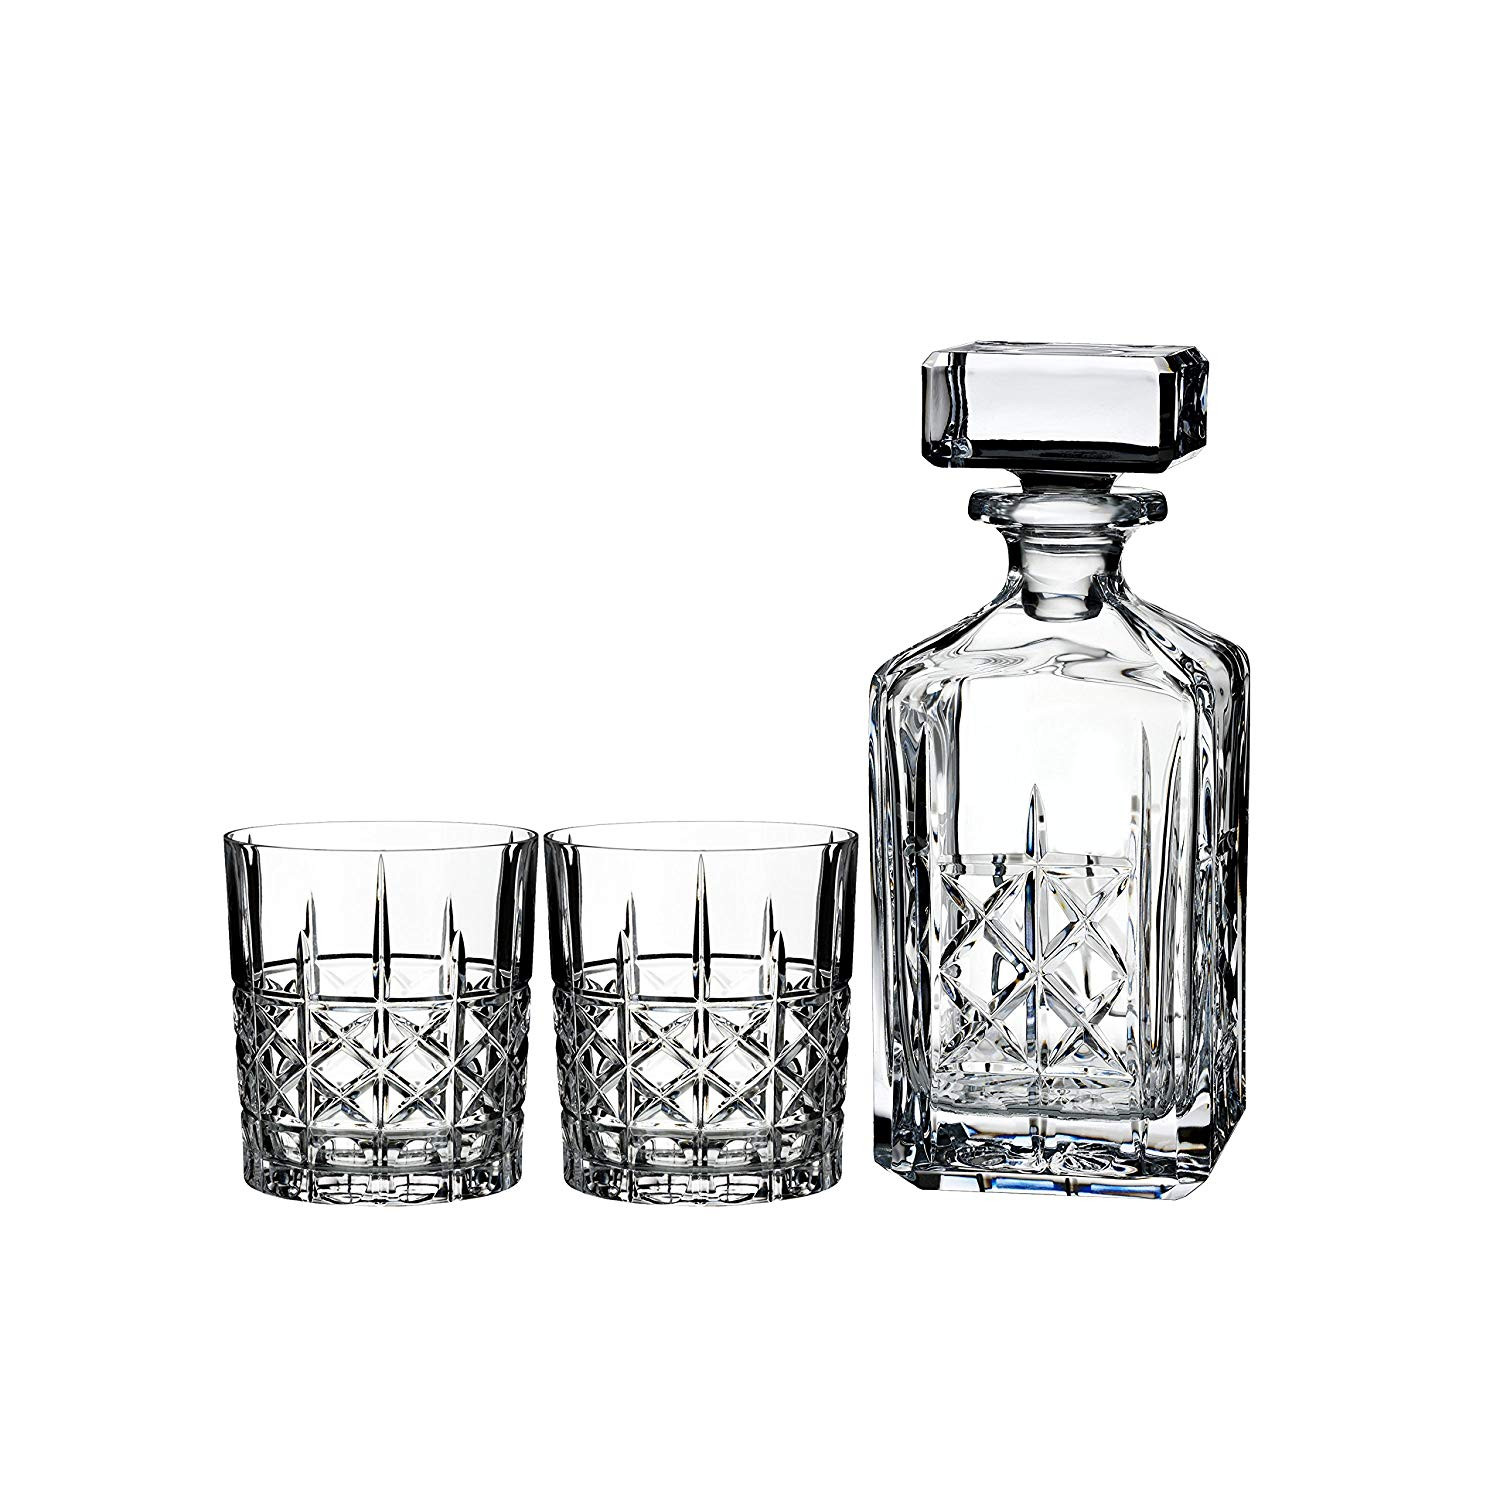 15 Spectacular Waterford Eastbridge 8 Vase 2024 free download waterford eastbridge 8 vase of amazon com marquis by waterford brady decanter and double old inside amazon com marquis by waterford brady decanter and double old fashion set decanters